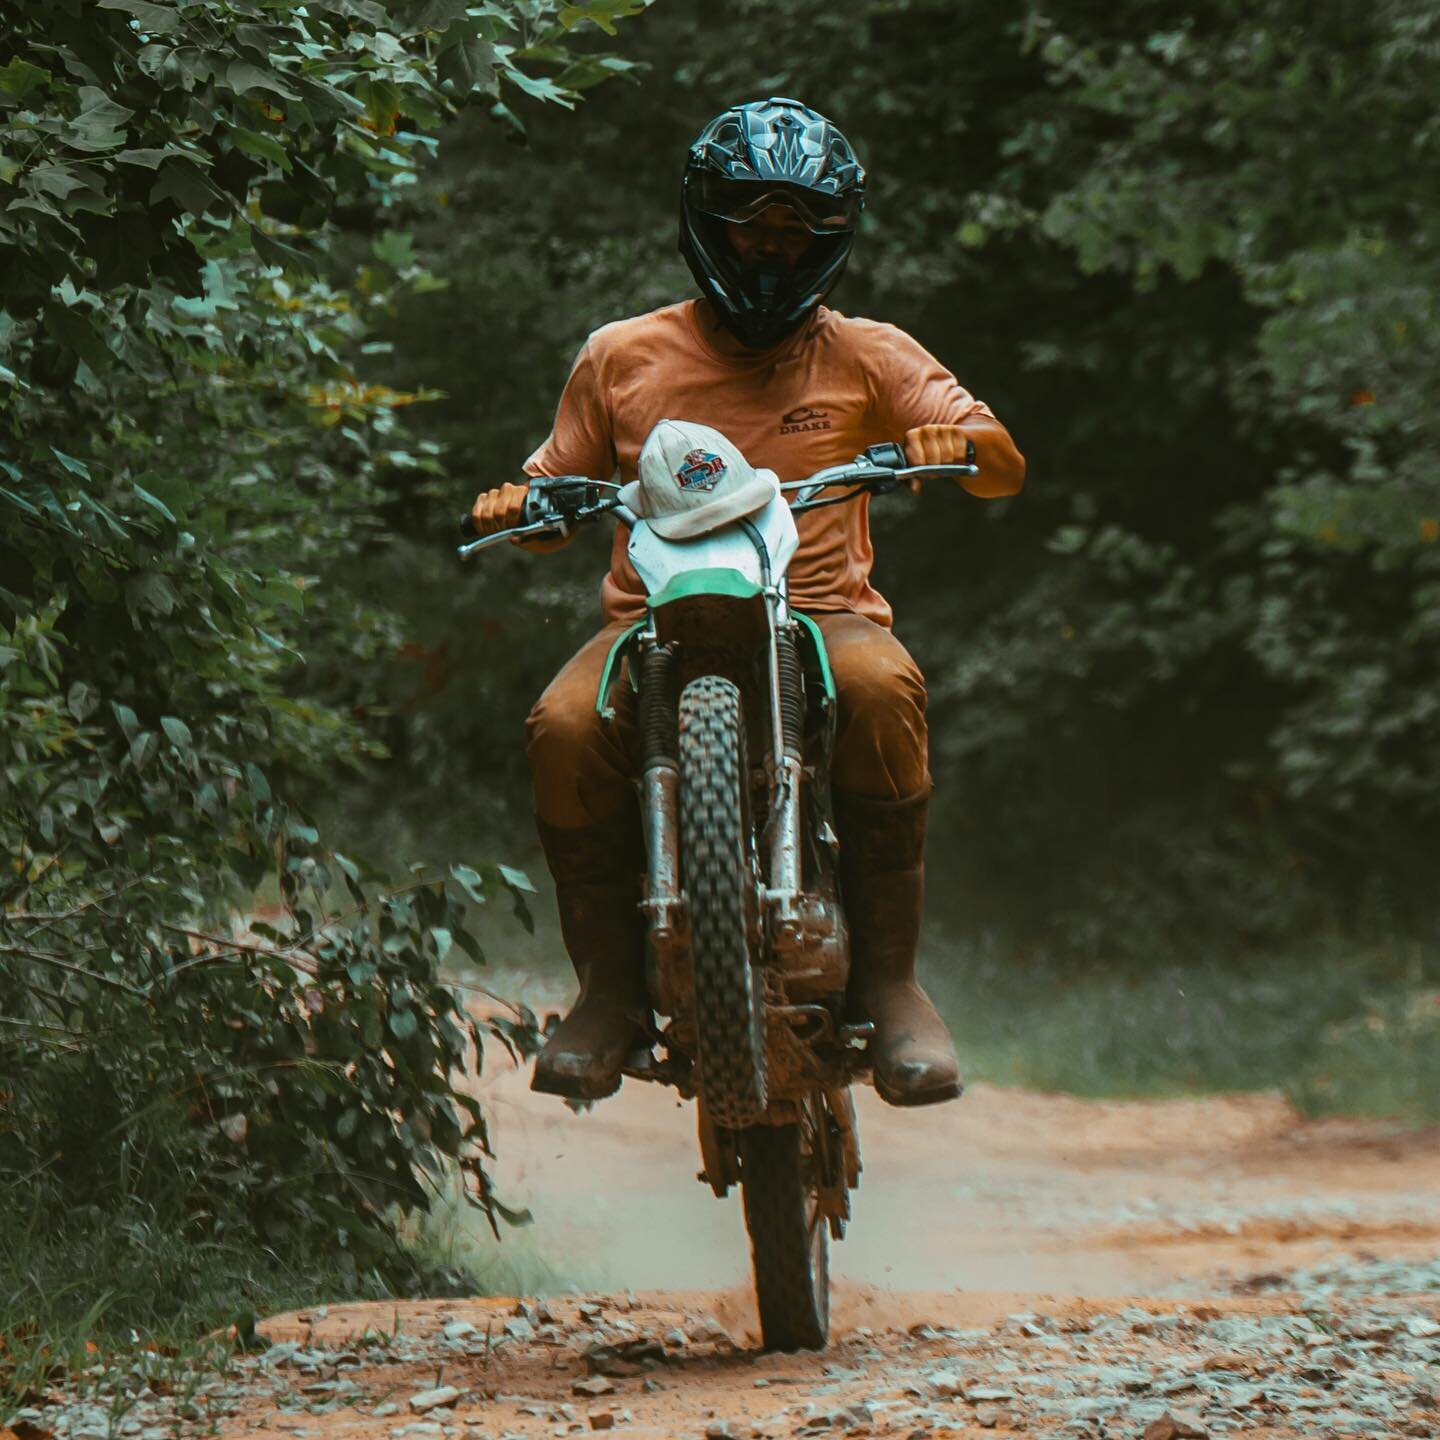 Who hit the trails this past weekend?
.
.
Let us know if you&rsquo;ve visited us or planning on it this next weekend!
.
.
#coalmontohvpark #tnsouthcumberland #mountainsofadventure #instagramtennessee #offroad #quadbike #trailripping #ohv #onlyintenne